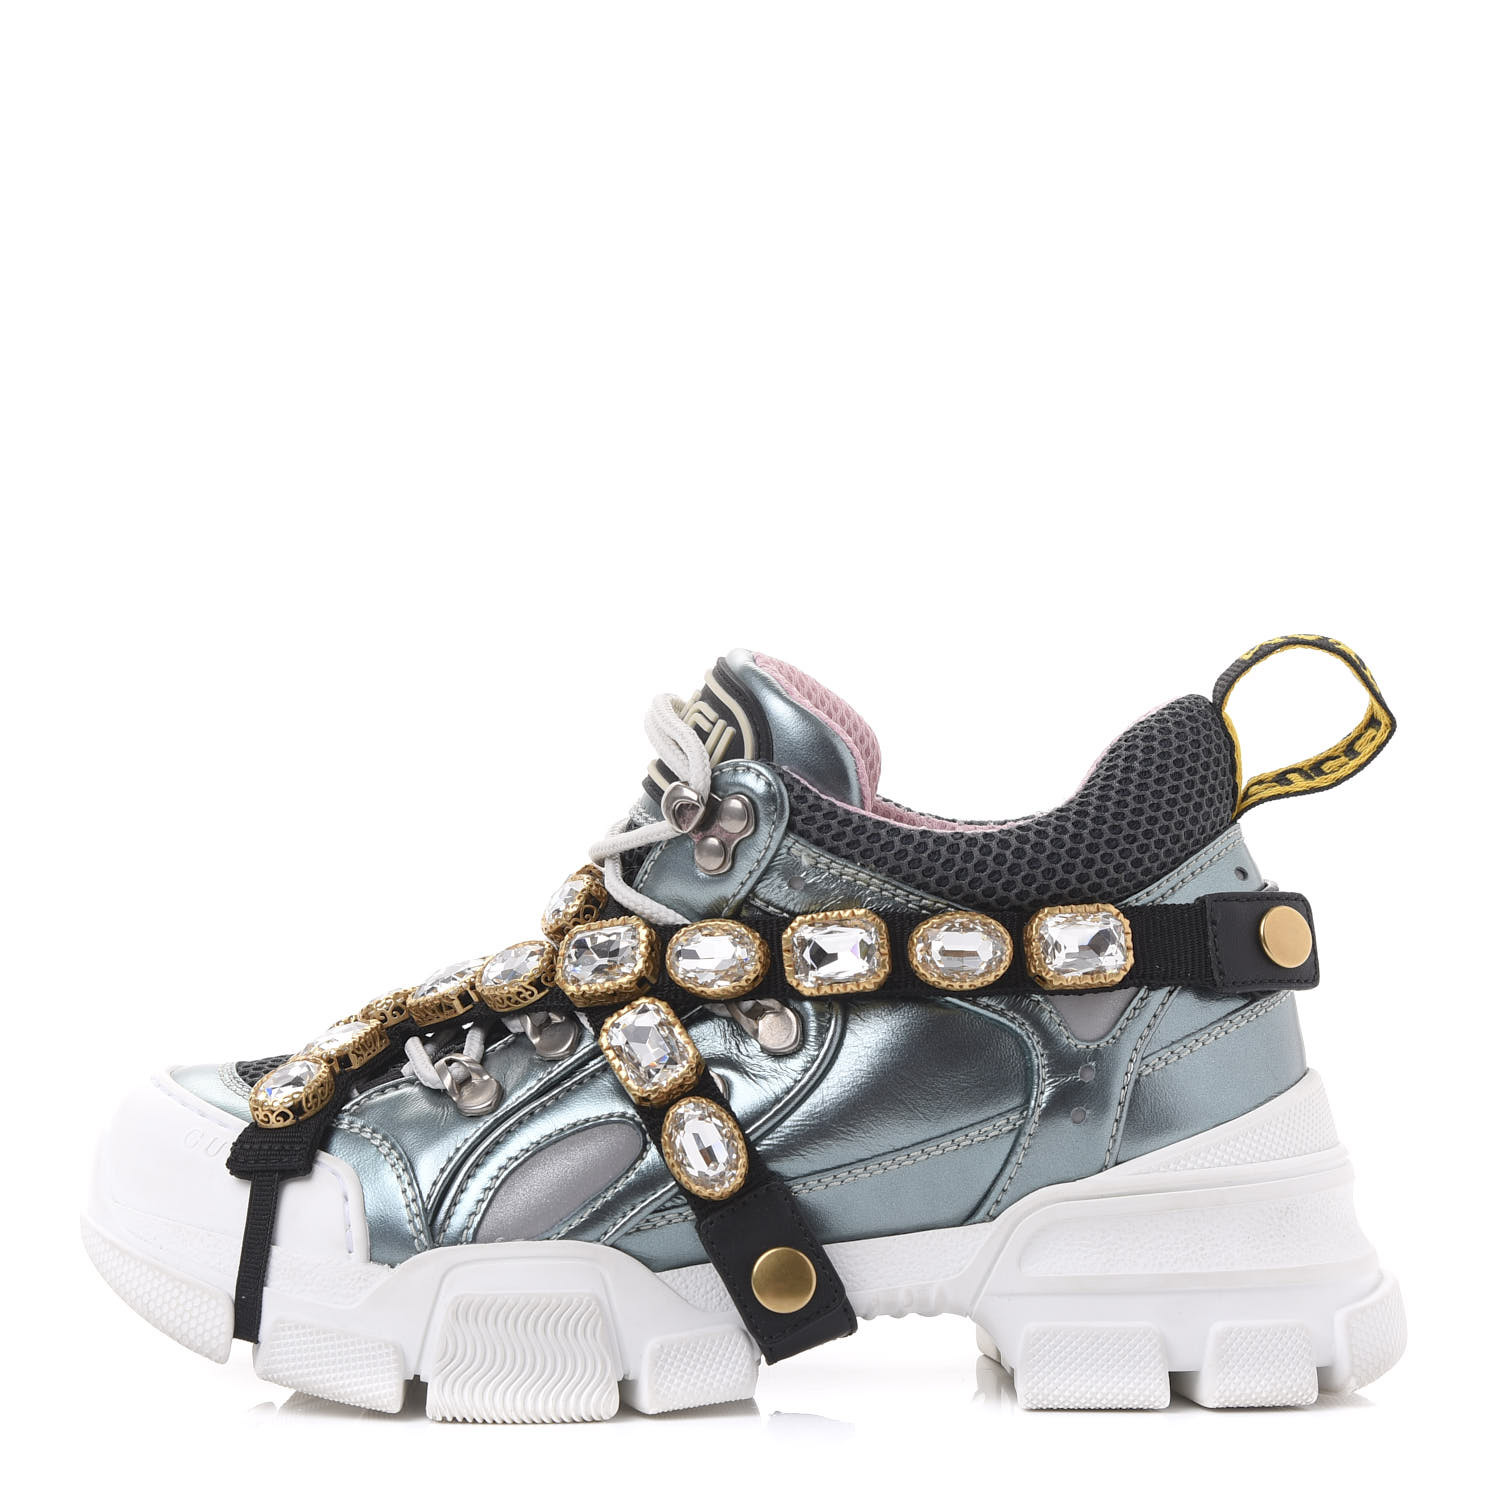 flashtrek sneaker with removable crystals price